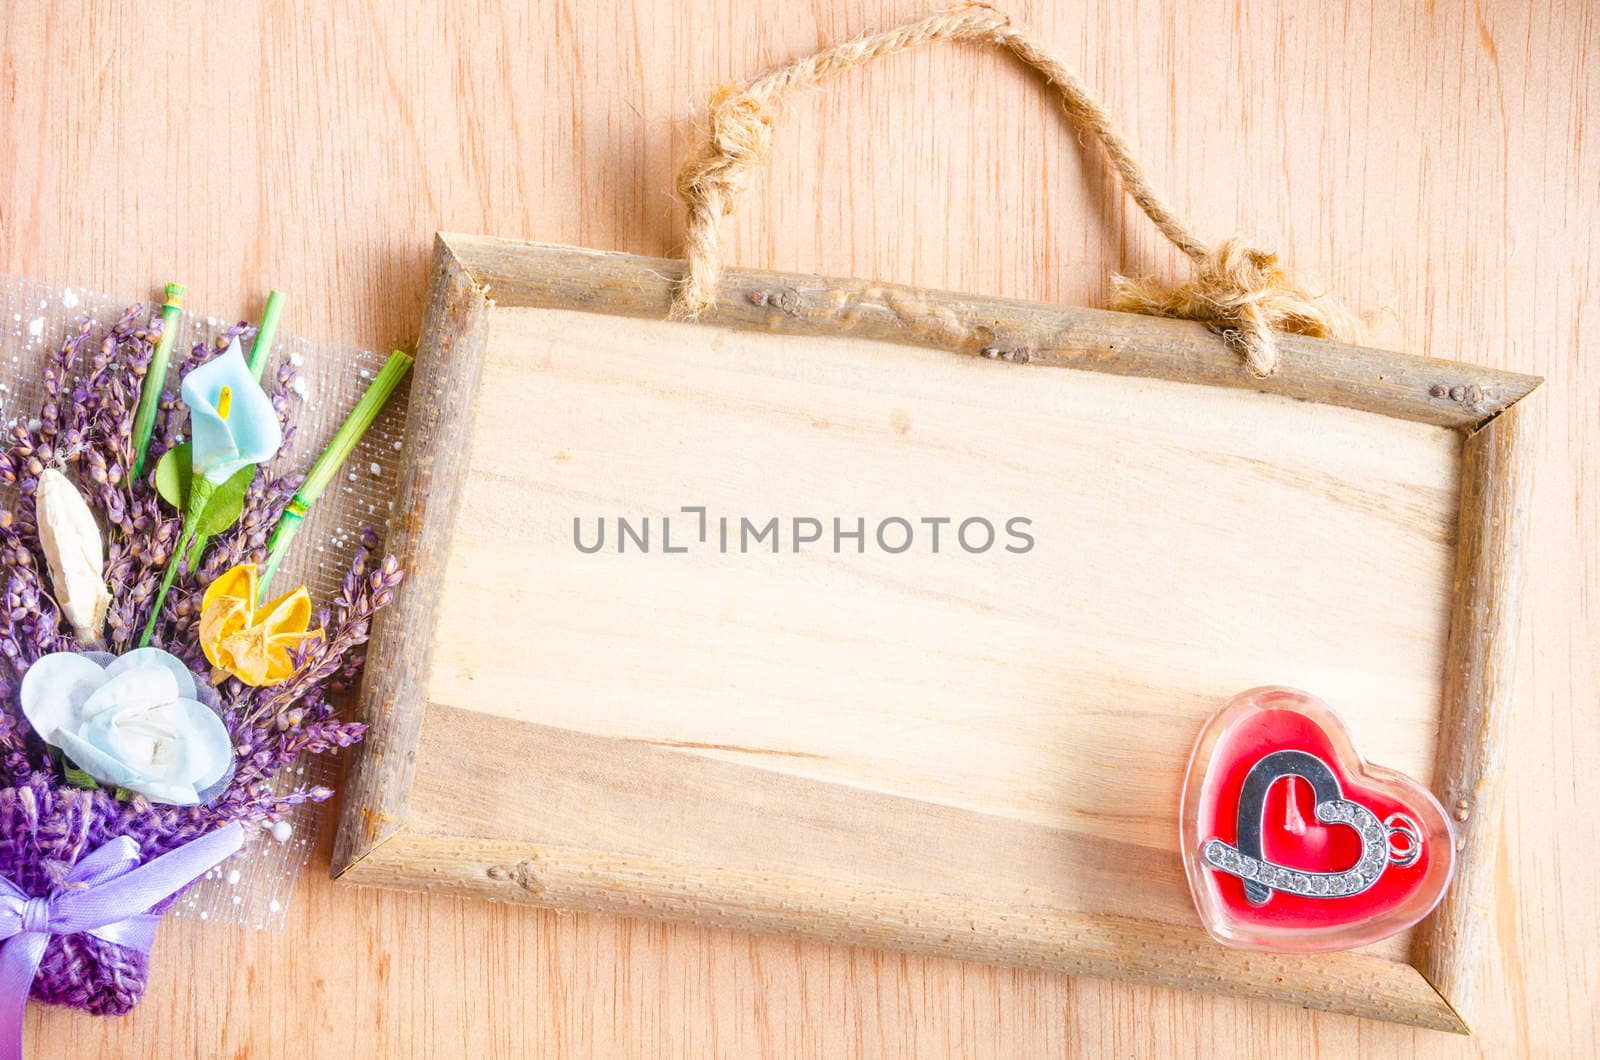 wooden photo frame and pendant in the shape of heart on wooden background.